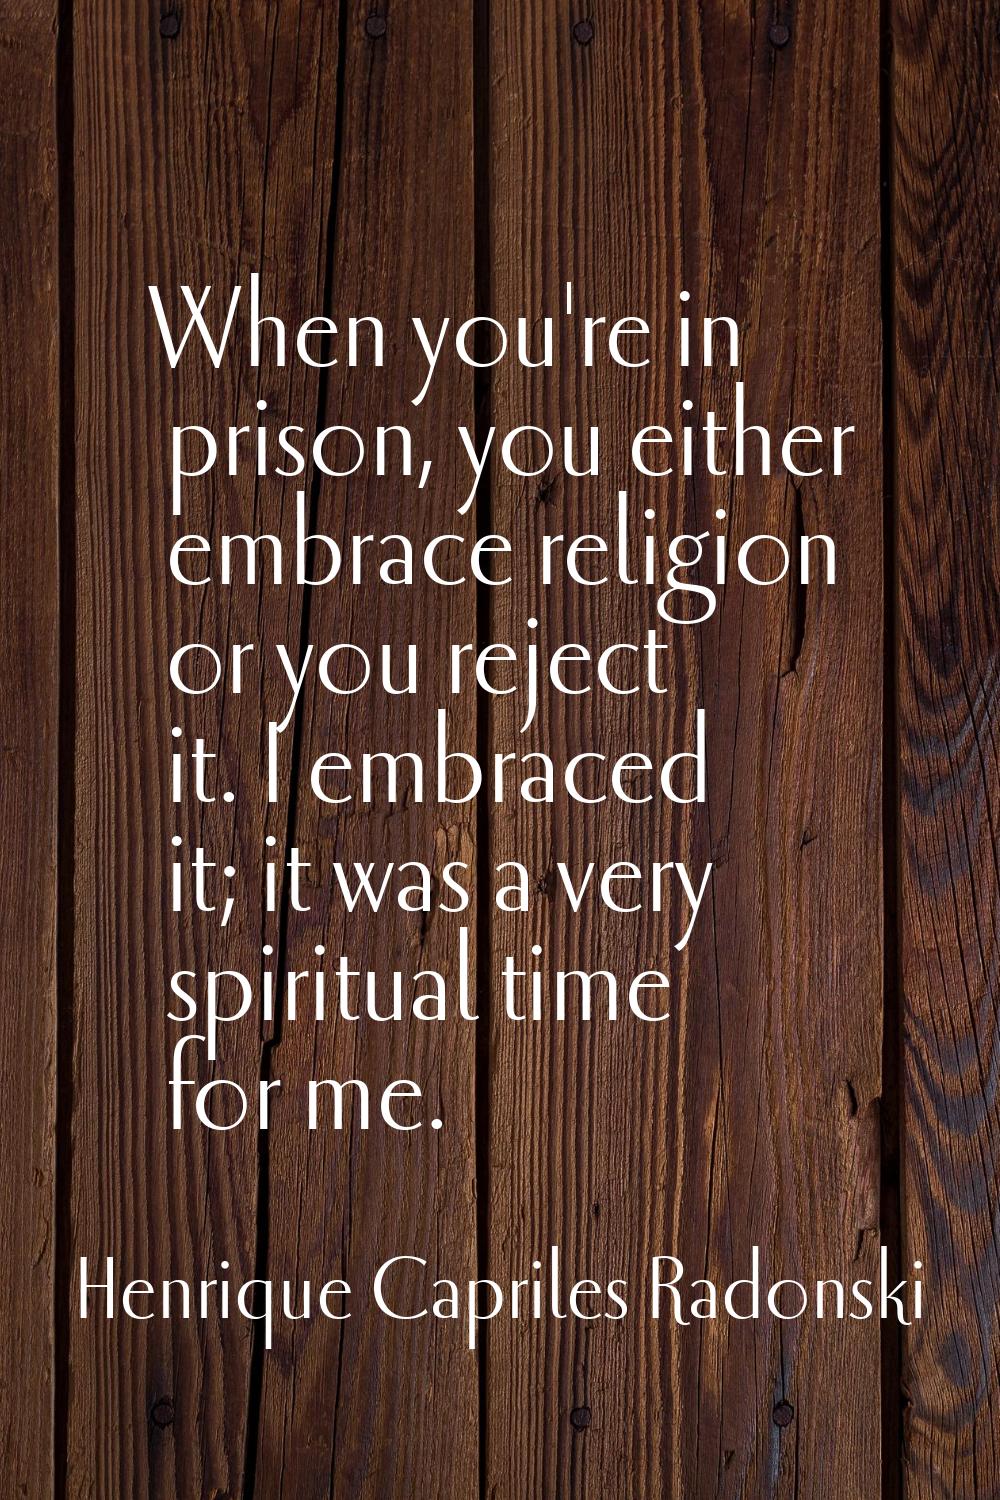 When you're in prison, you either embrace religion or you reject it. I embraced it; it was a very s